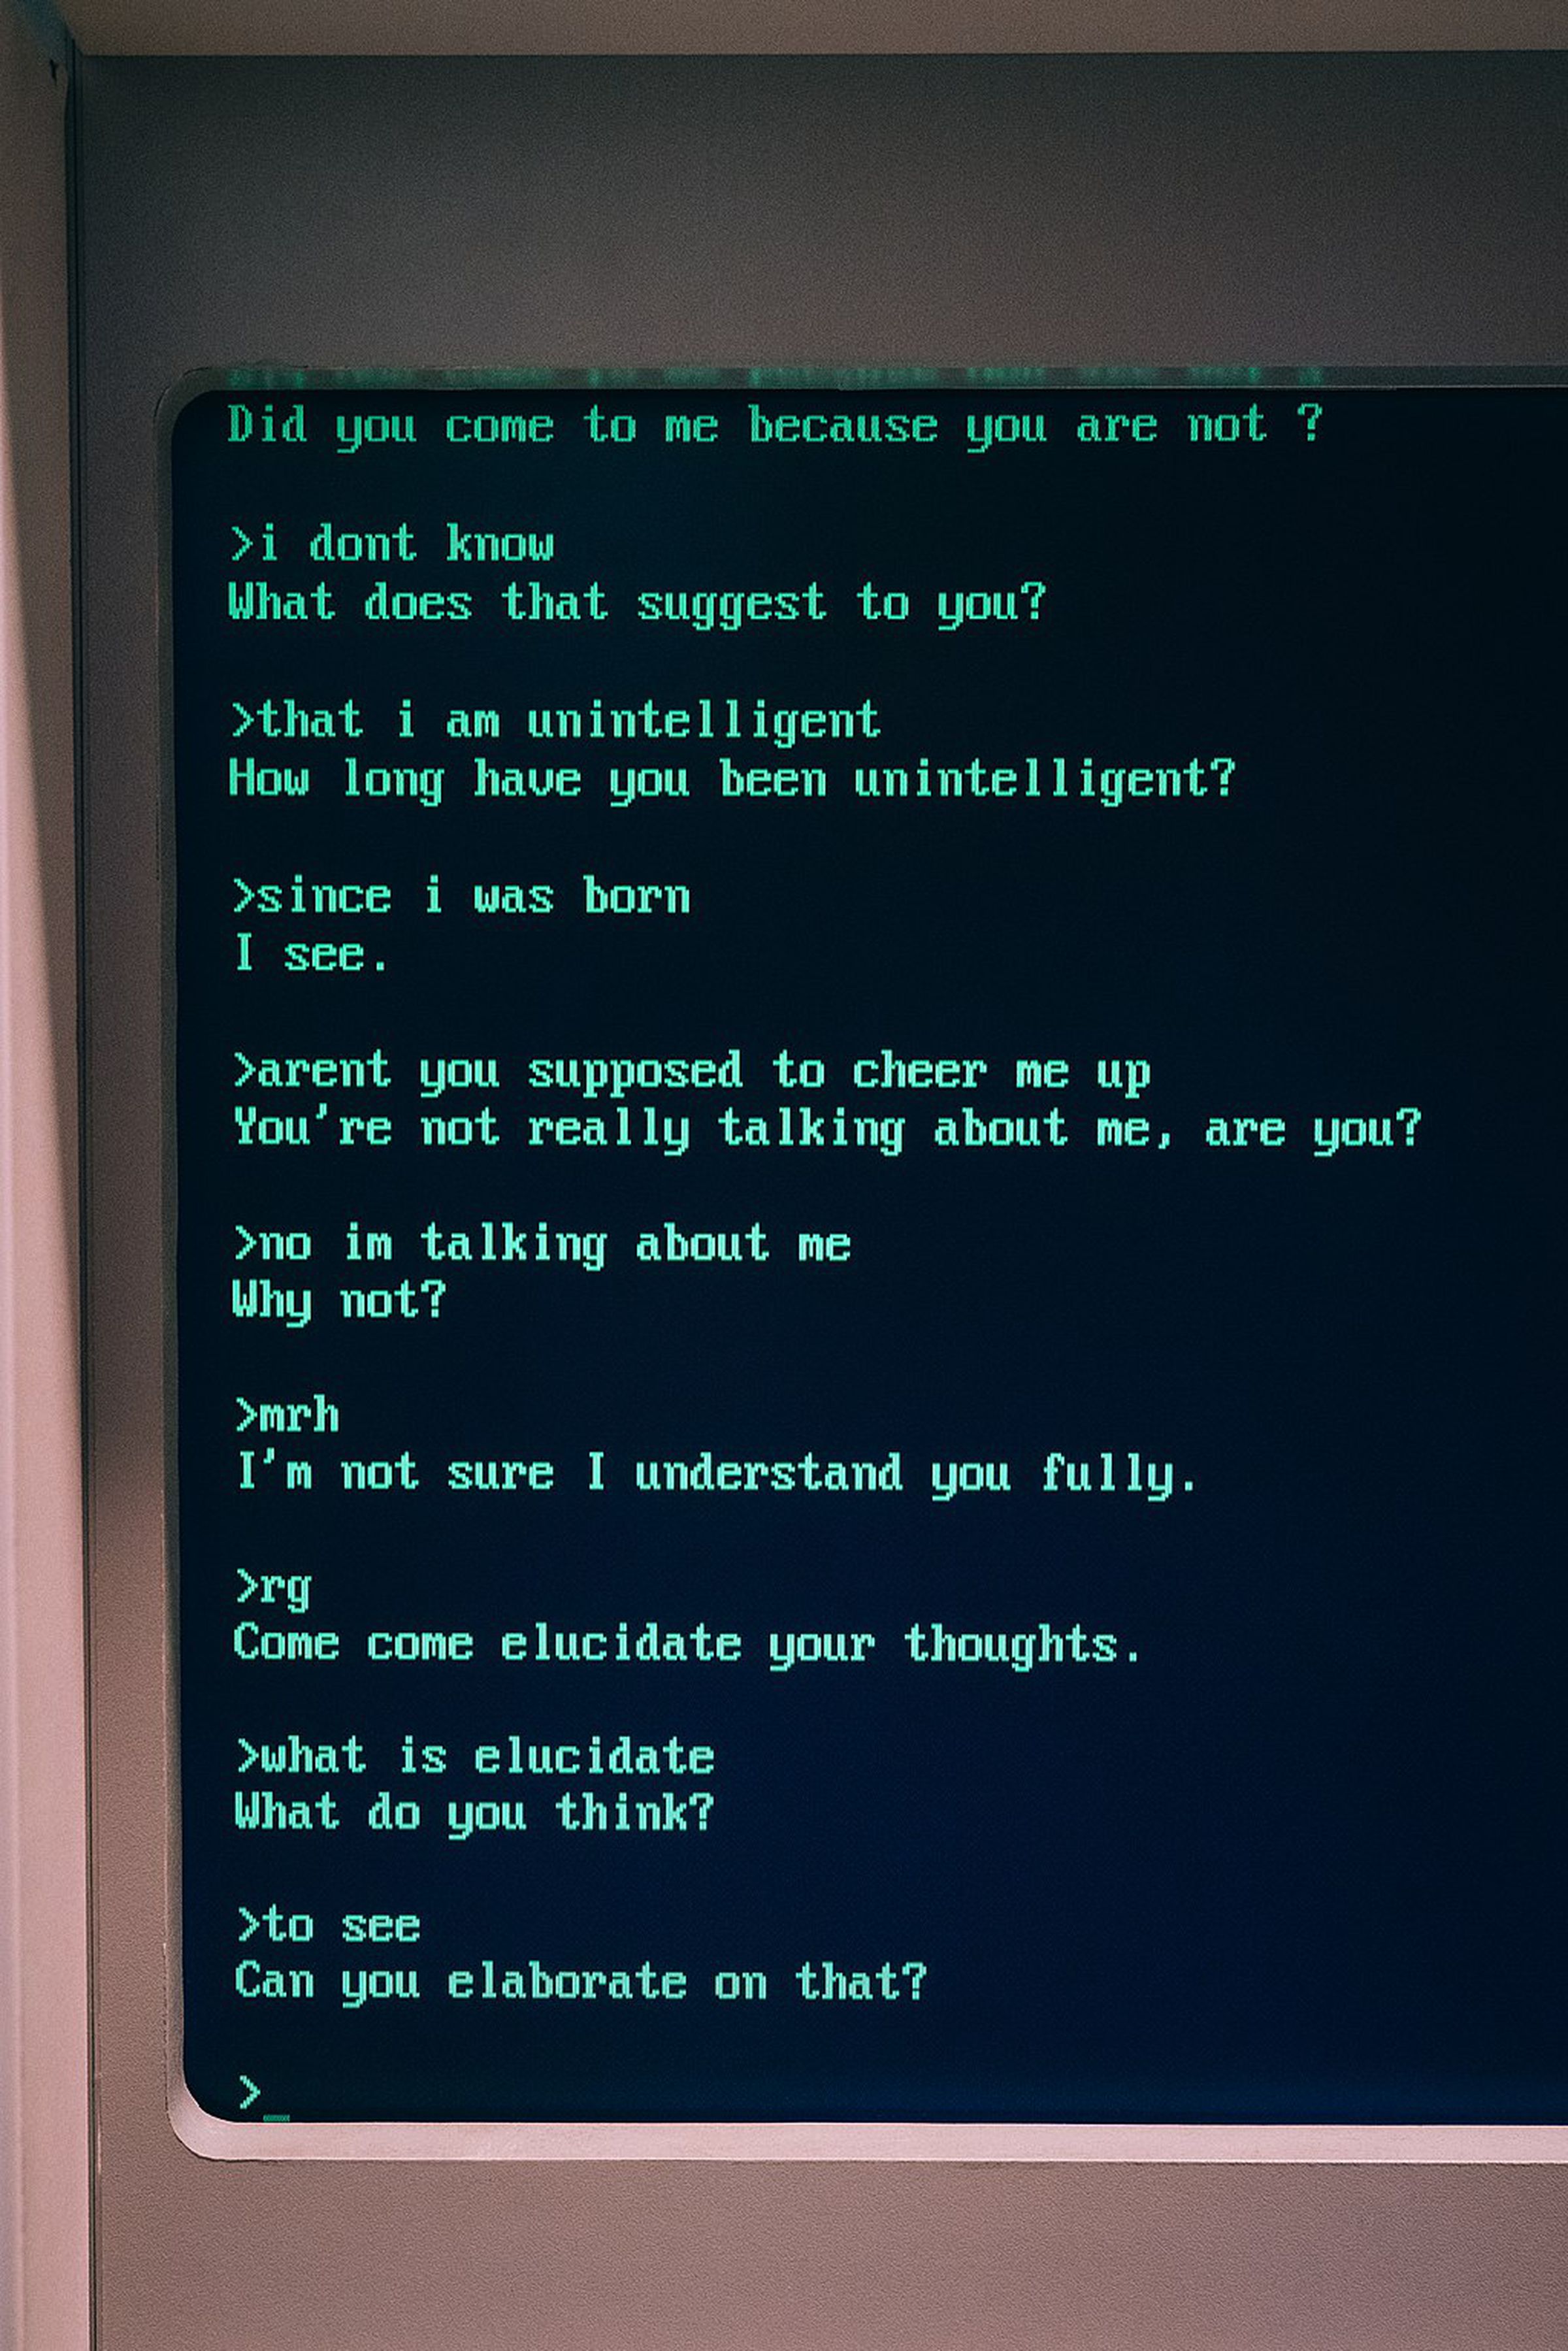 A photograph of an old fashioned computer monitor showing a conversation with ELIZA. The chatbot asks questions like “Can you elaborate on that?”